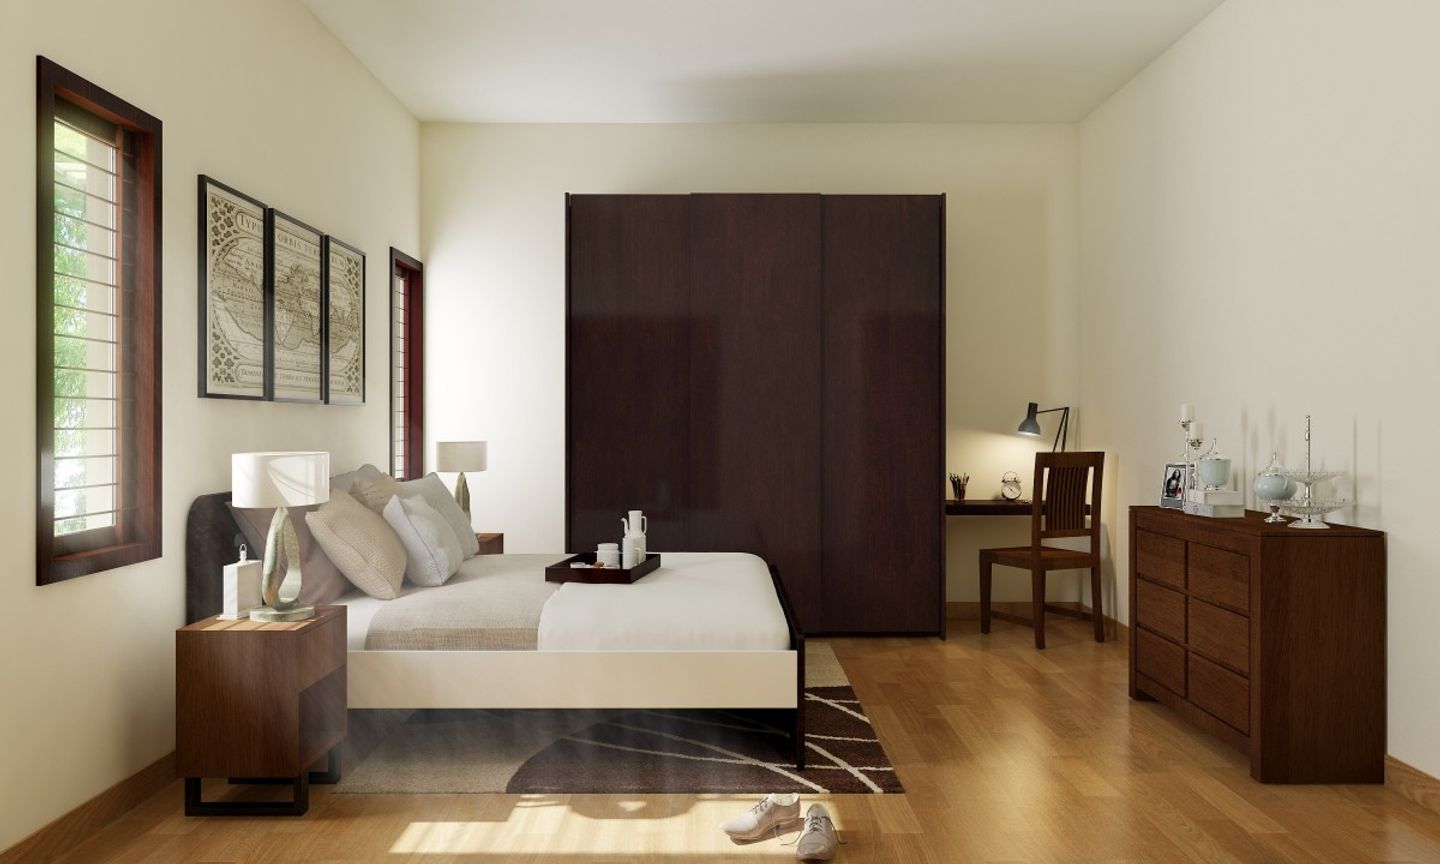 Modern Guest Bedroom Design With Cream And Brown Interiors